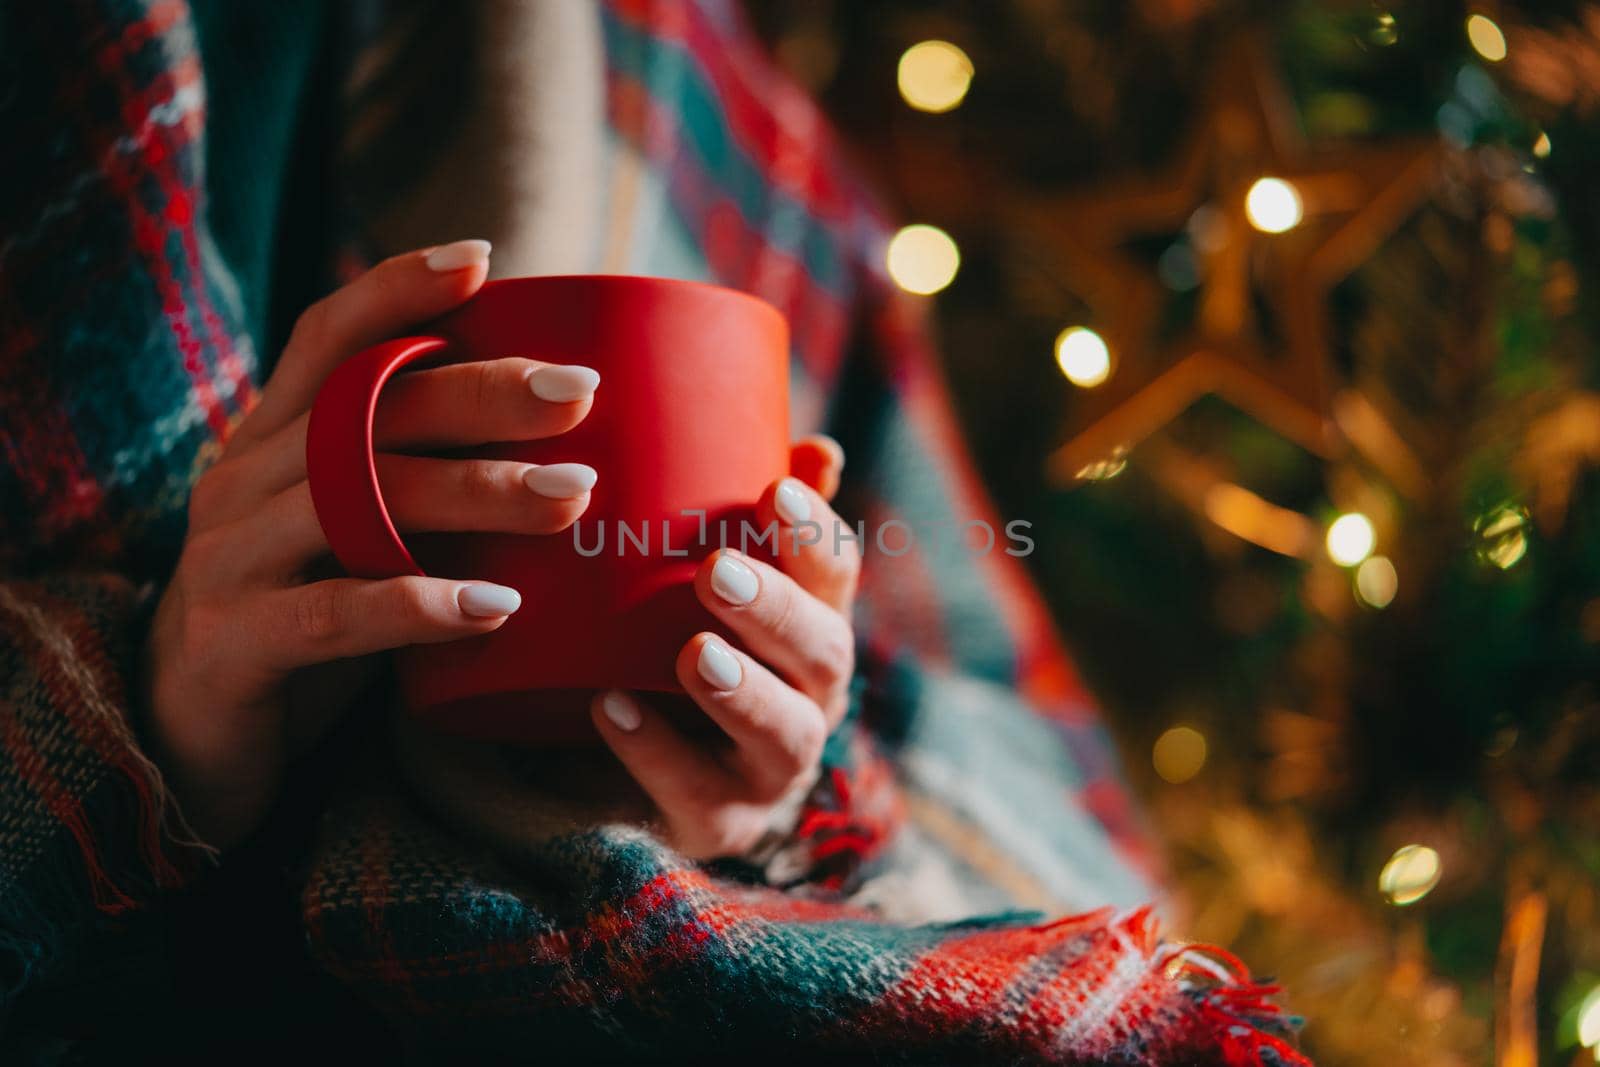 Unrecognizable woman holding cozy red mug on glowing Christmas tree background. Girl with hot drink - tea, coffee or cocoa. Concept of the New Year, comfort and warmth. by kristina_kokhanova